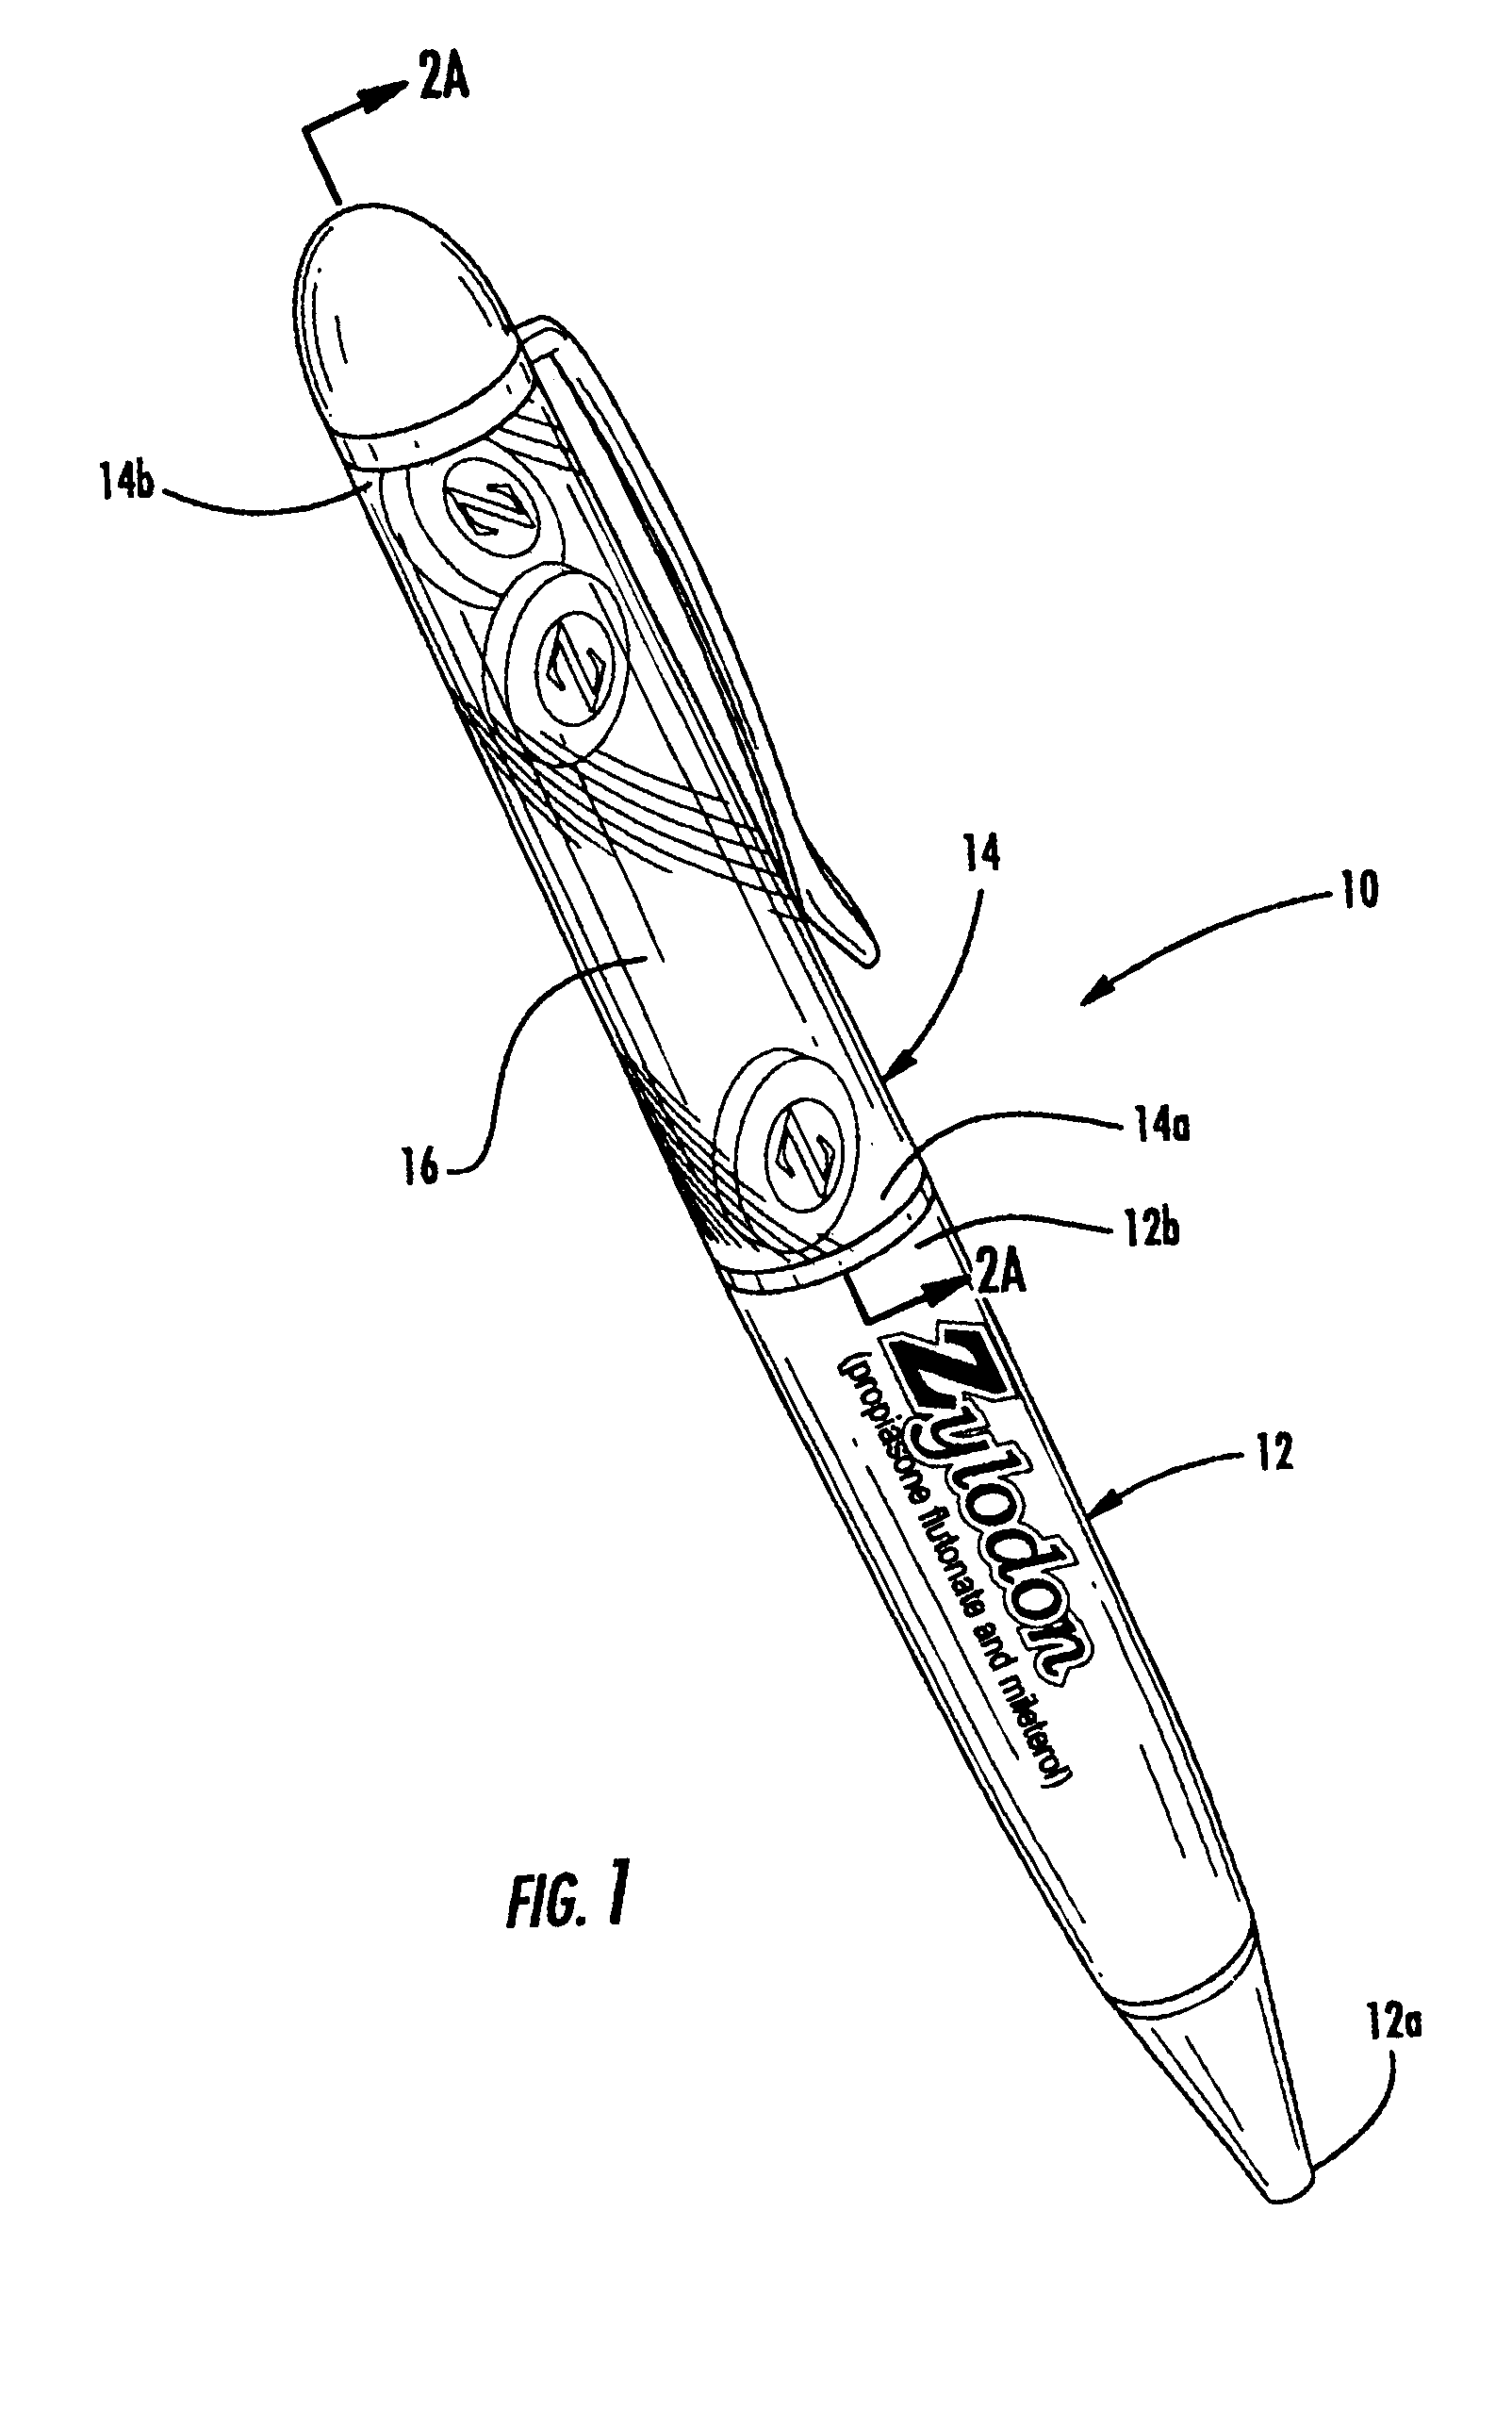 Writing instrument with fluid-containing barrel